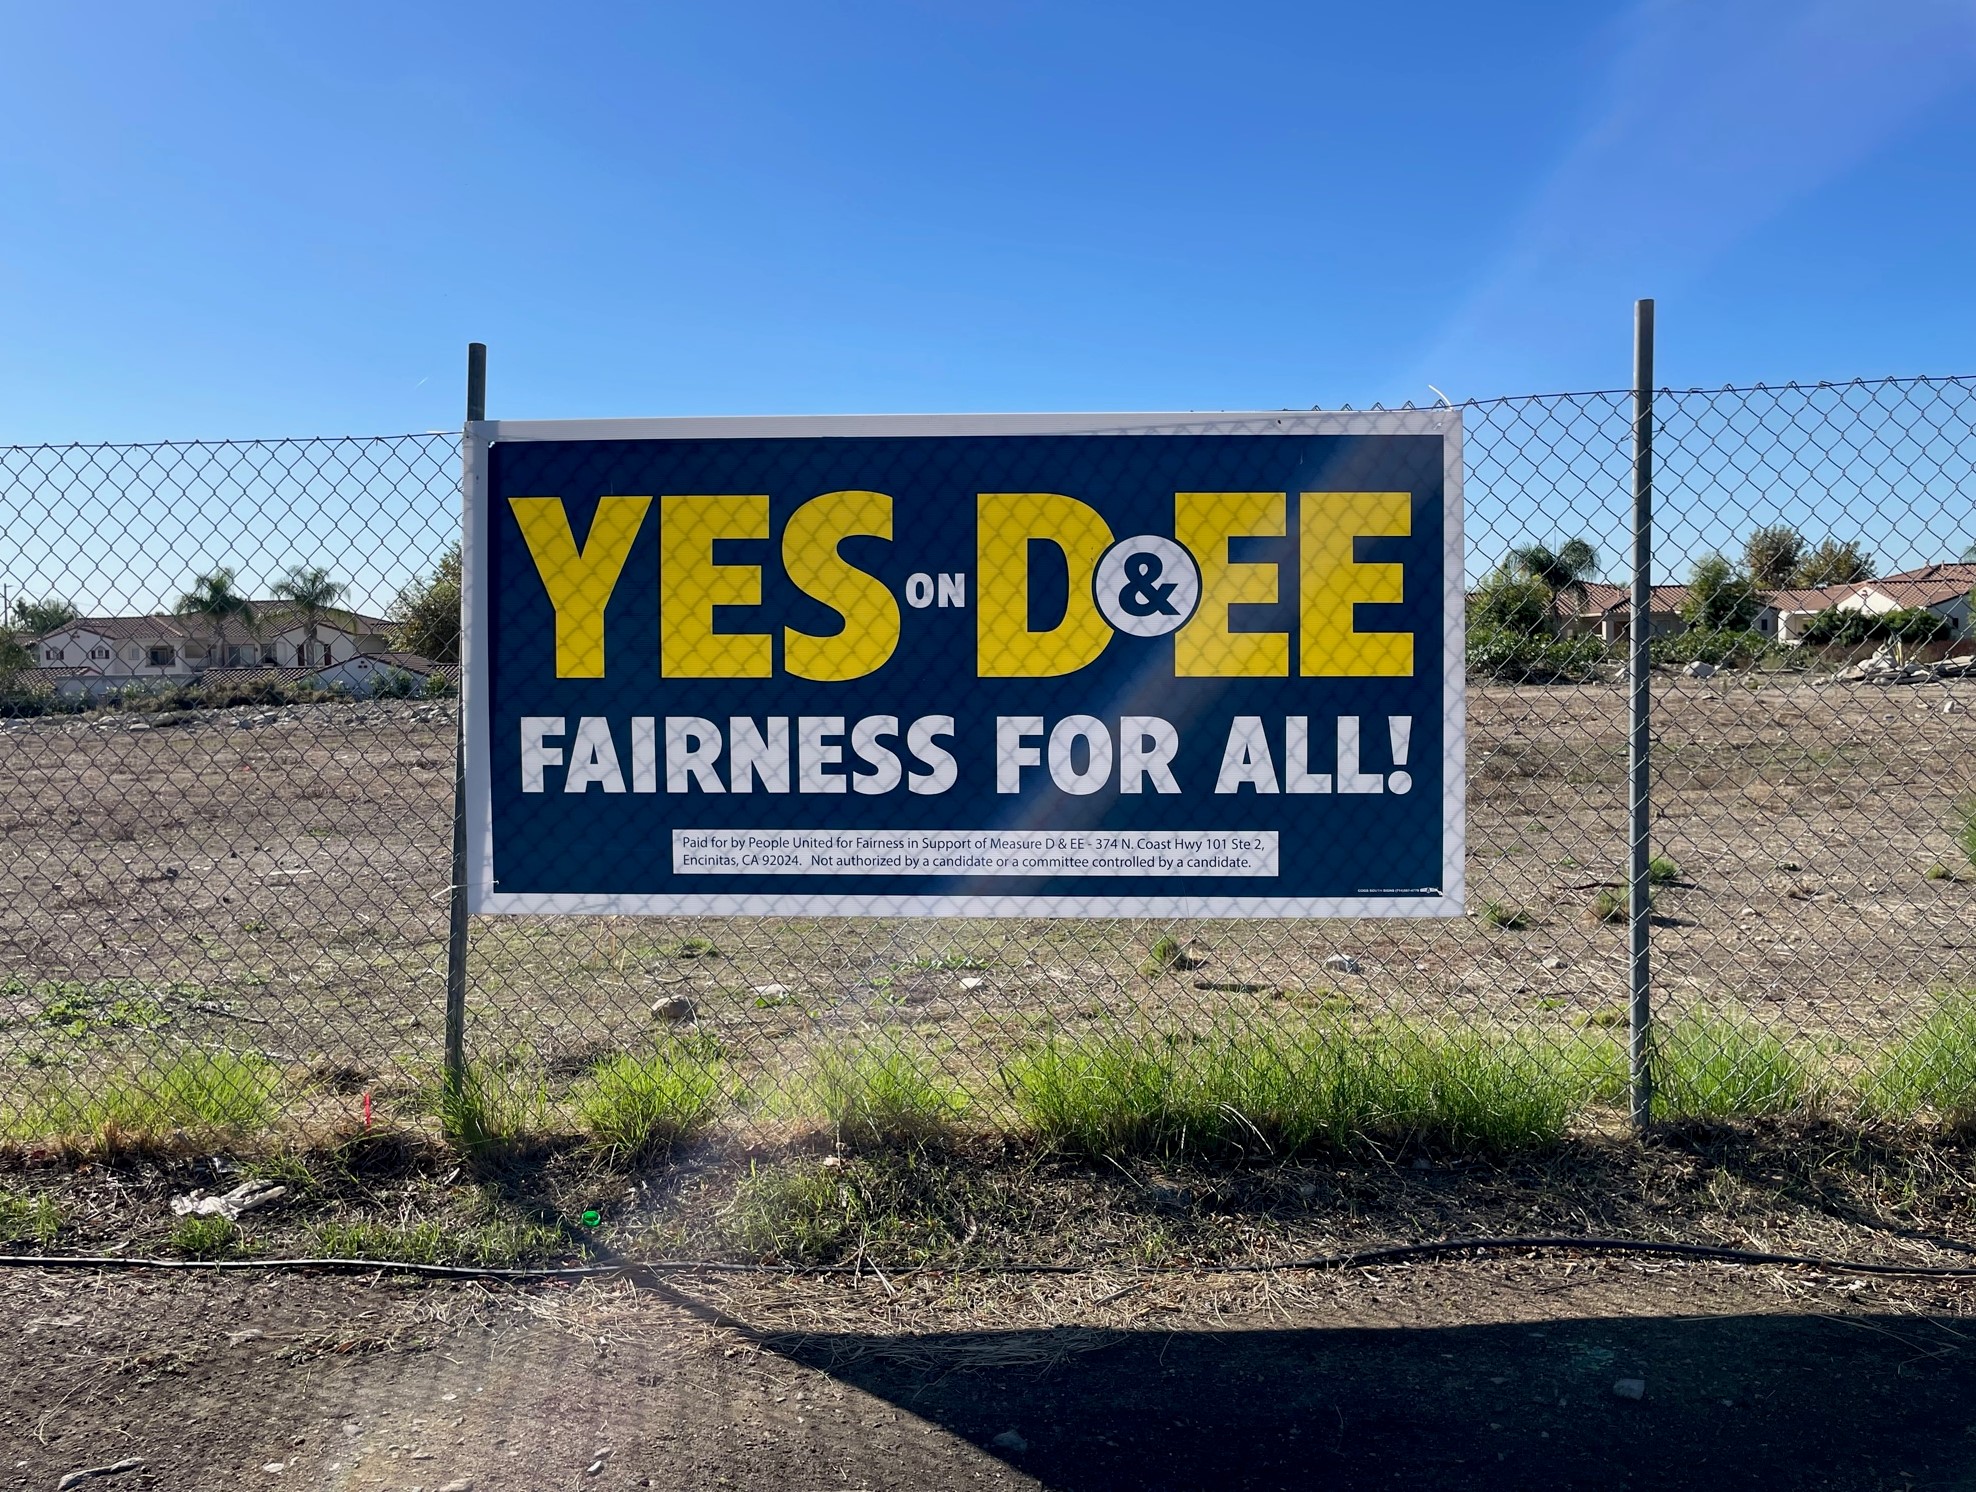 Campaign signs around San Bernardino County promote 2022's Measure EE, which asks about secession from California, using the slogan "Fairness for All!." Measure D reset county supervisors' pay and compensation to levels higher than were set in a ballot measure passed in 2020. (File photo by David Allen, Inland Valley Daily Bulletin/SCNG)